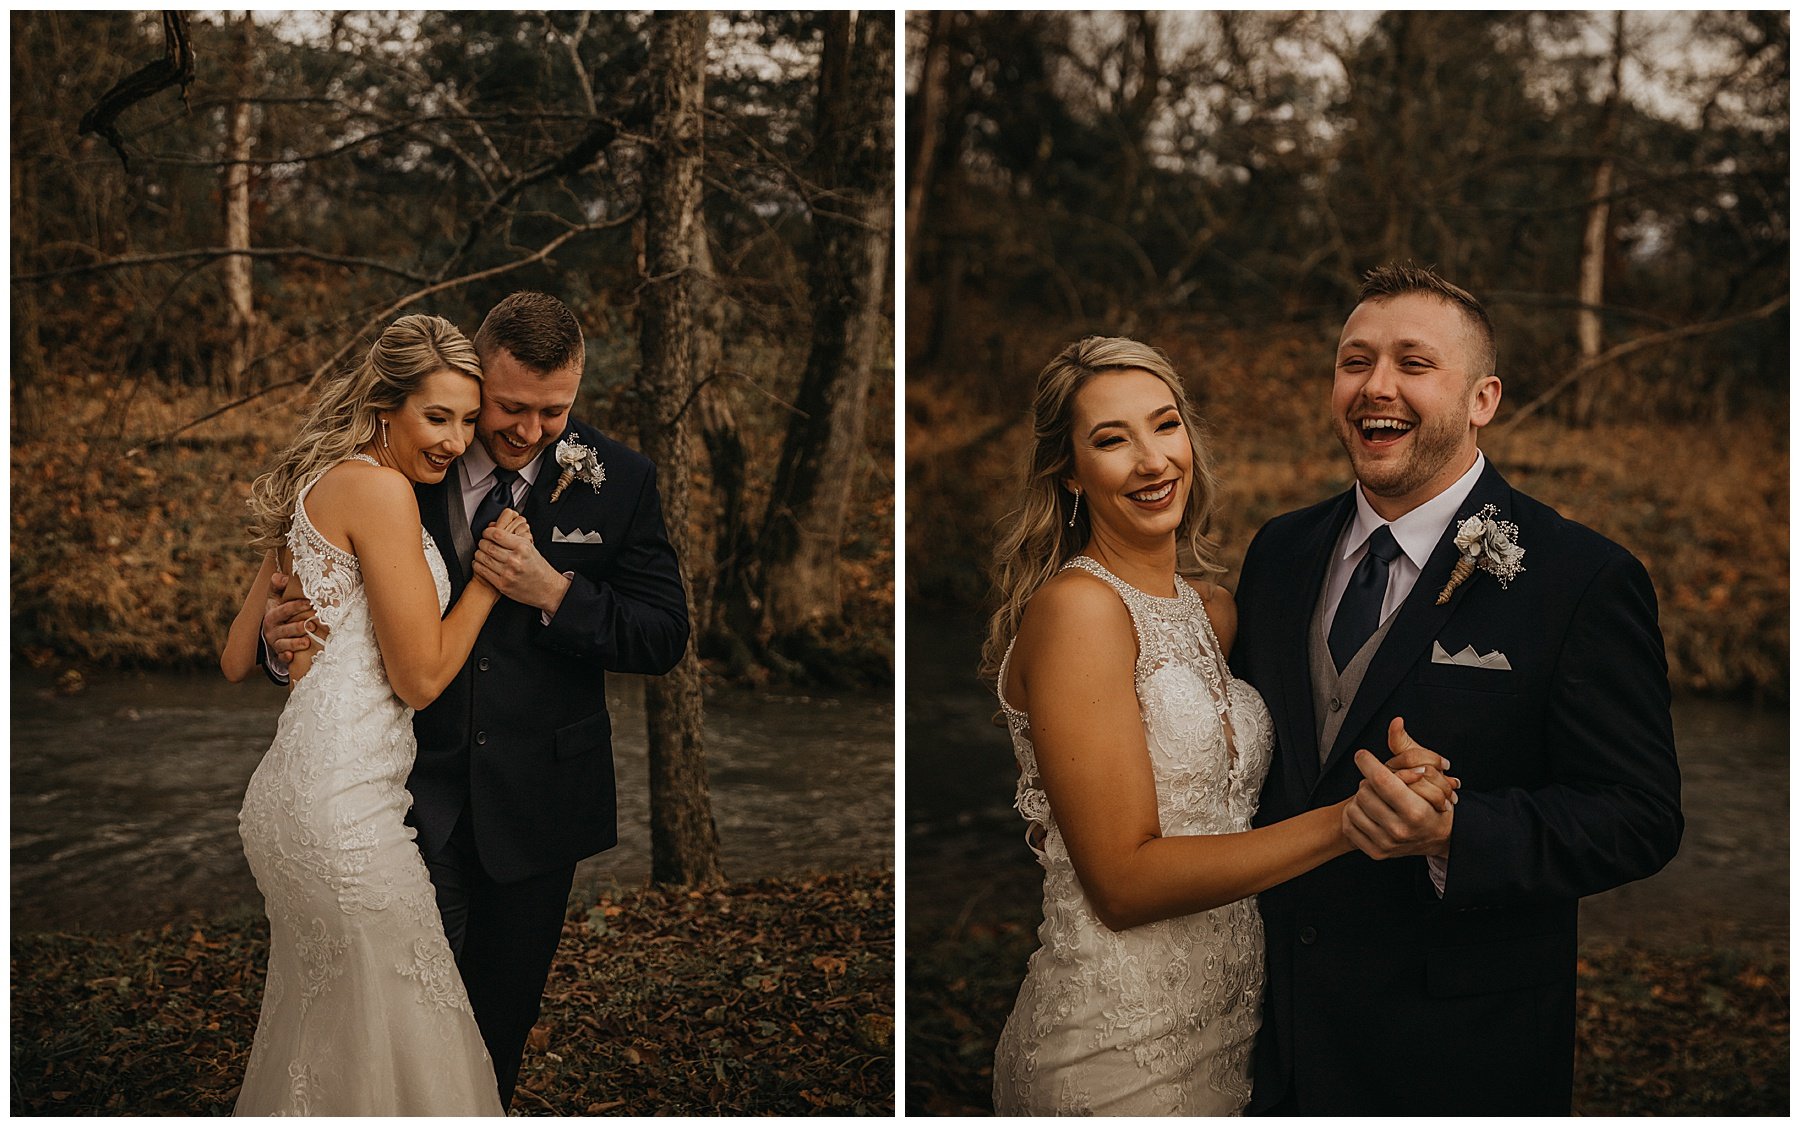 5 things included in your wedding photography